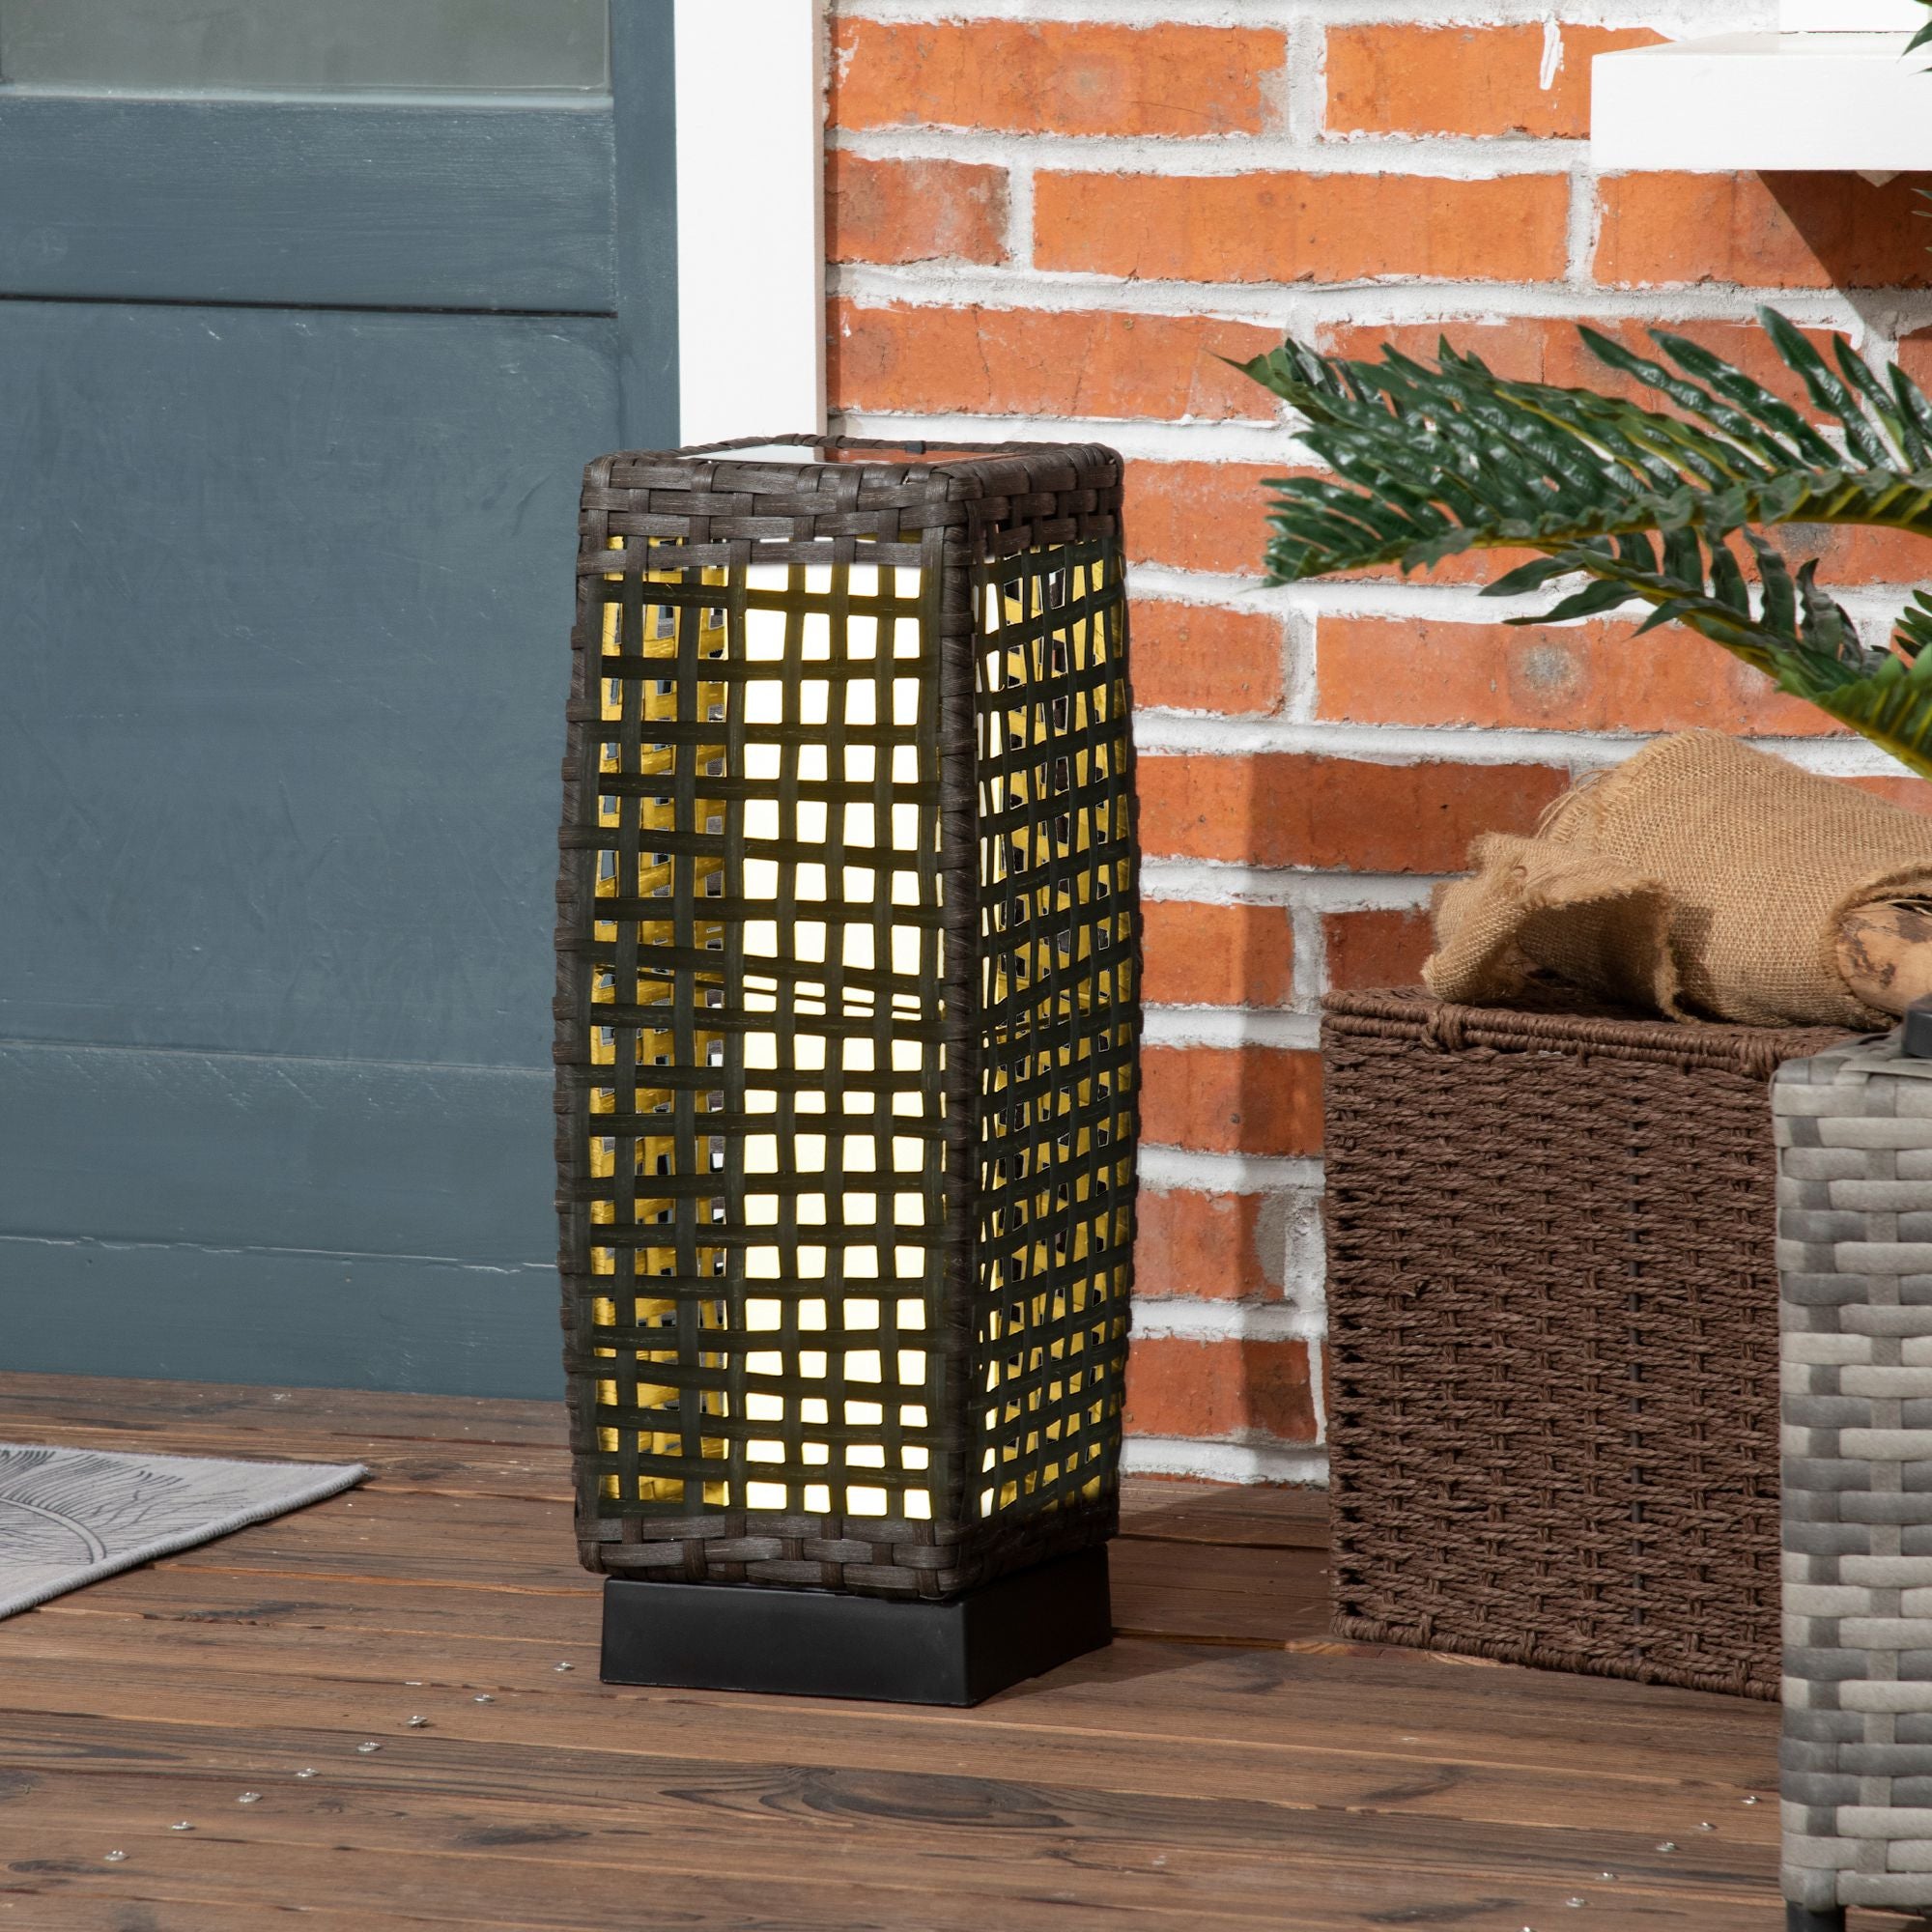 Outsunny Outdoor Rattan Solar Lantern, Brushed PE Wicker Patio Garden Lantern wtih Auto On/Off Solar Powered LED Lights for Indoor & Outdoor Use Grey